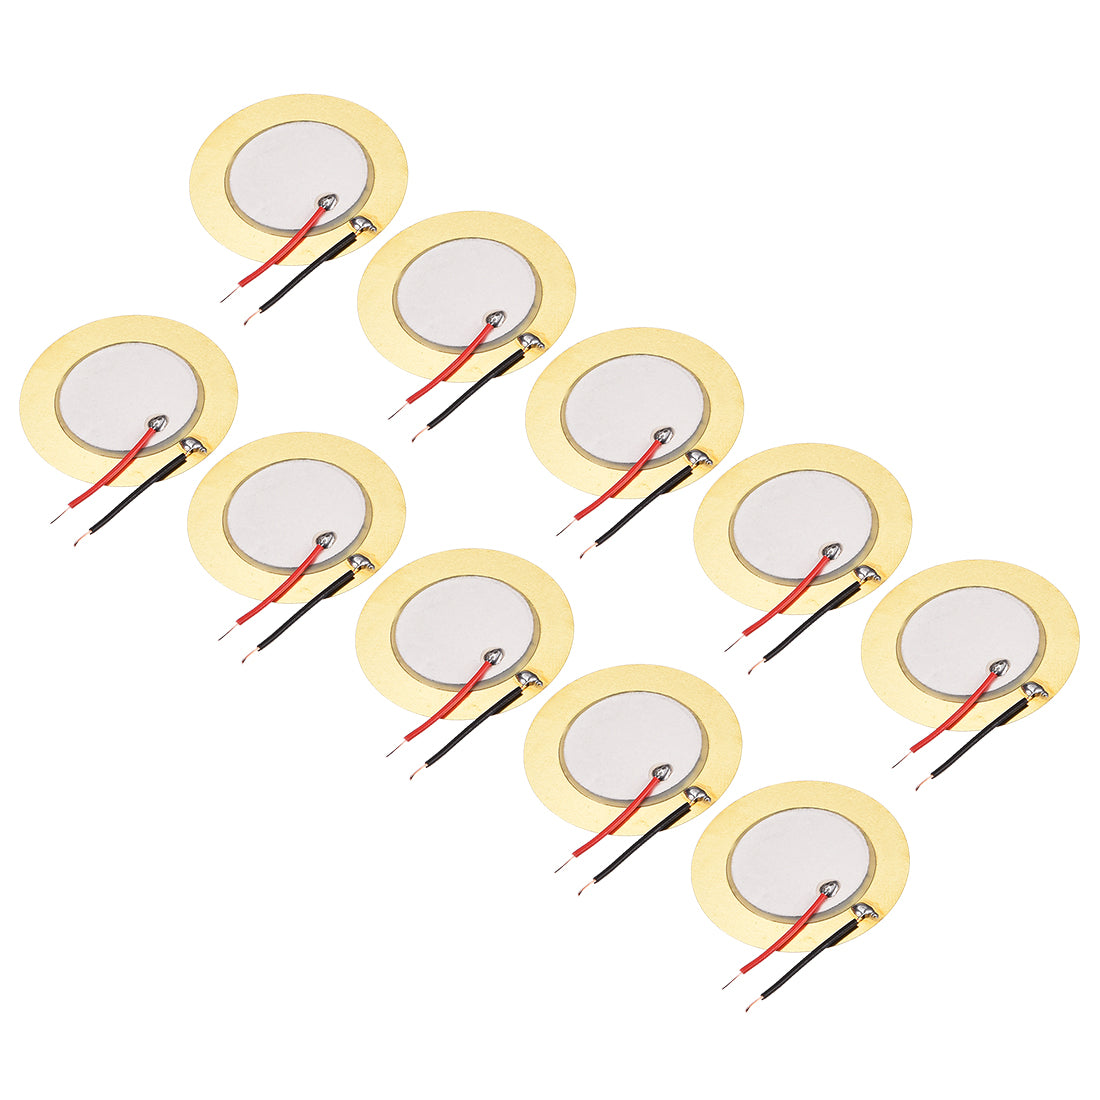 uxcell Uxcell 10 Pcs Piezo Discs 35mm Acoustic Pickup Transducer Microphone Trigger Buzzer Drum Guitar